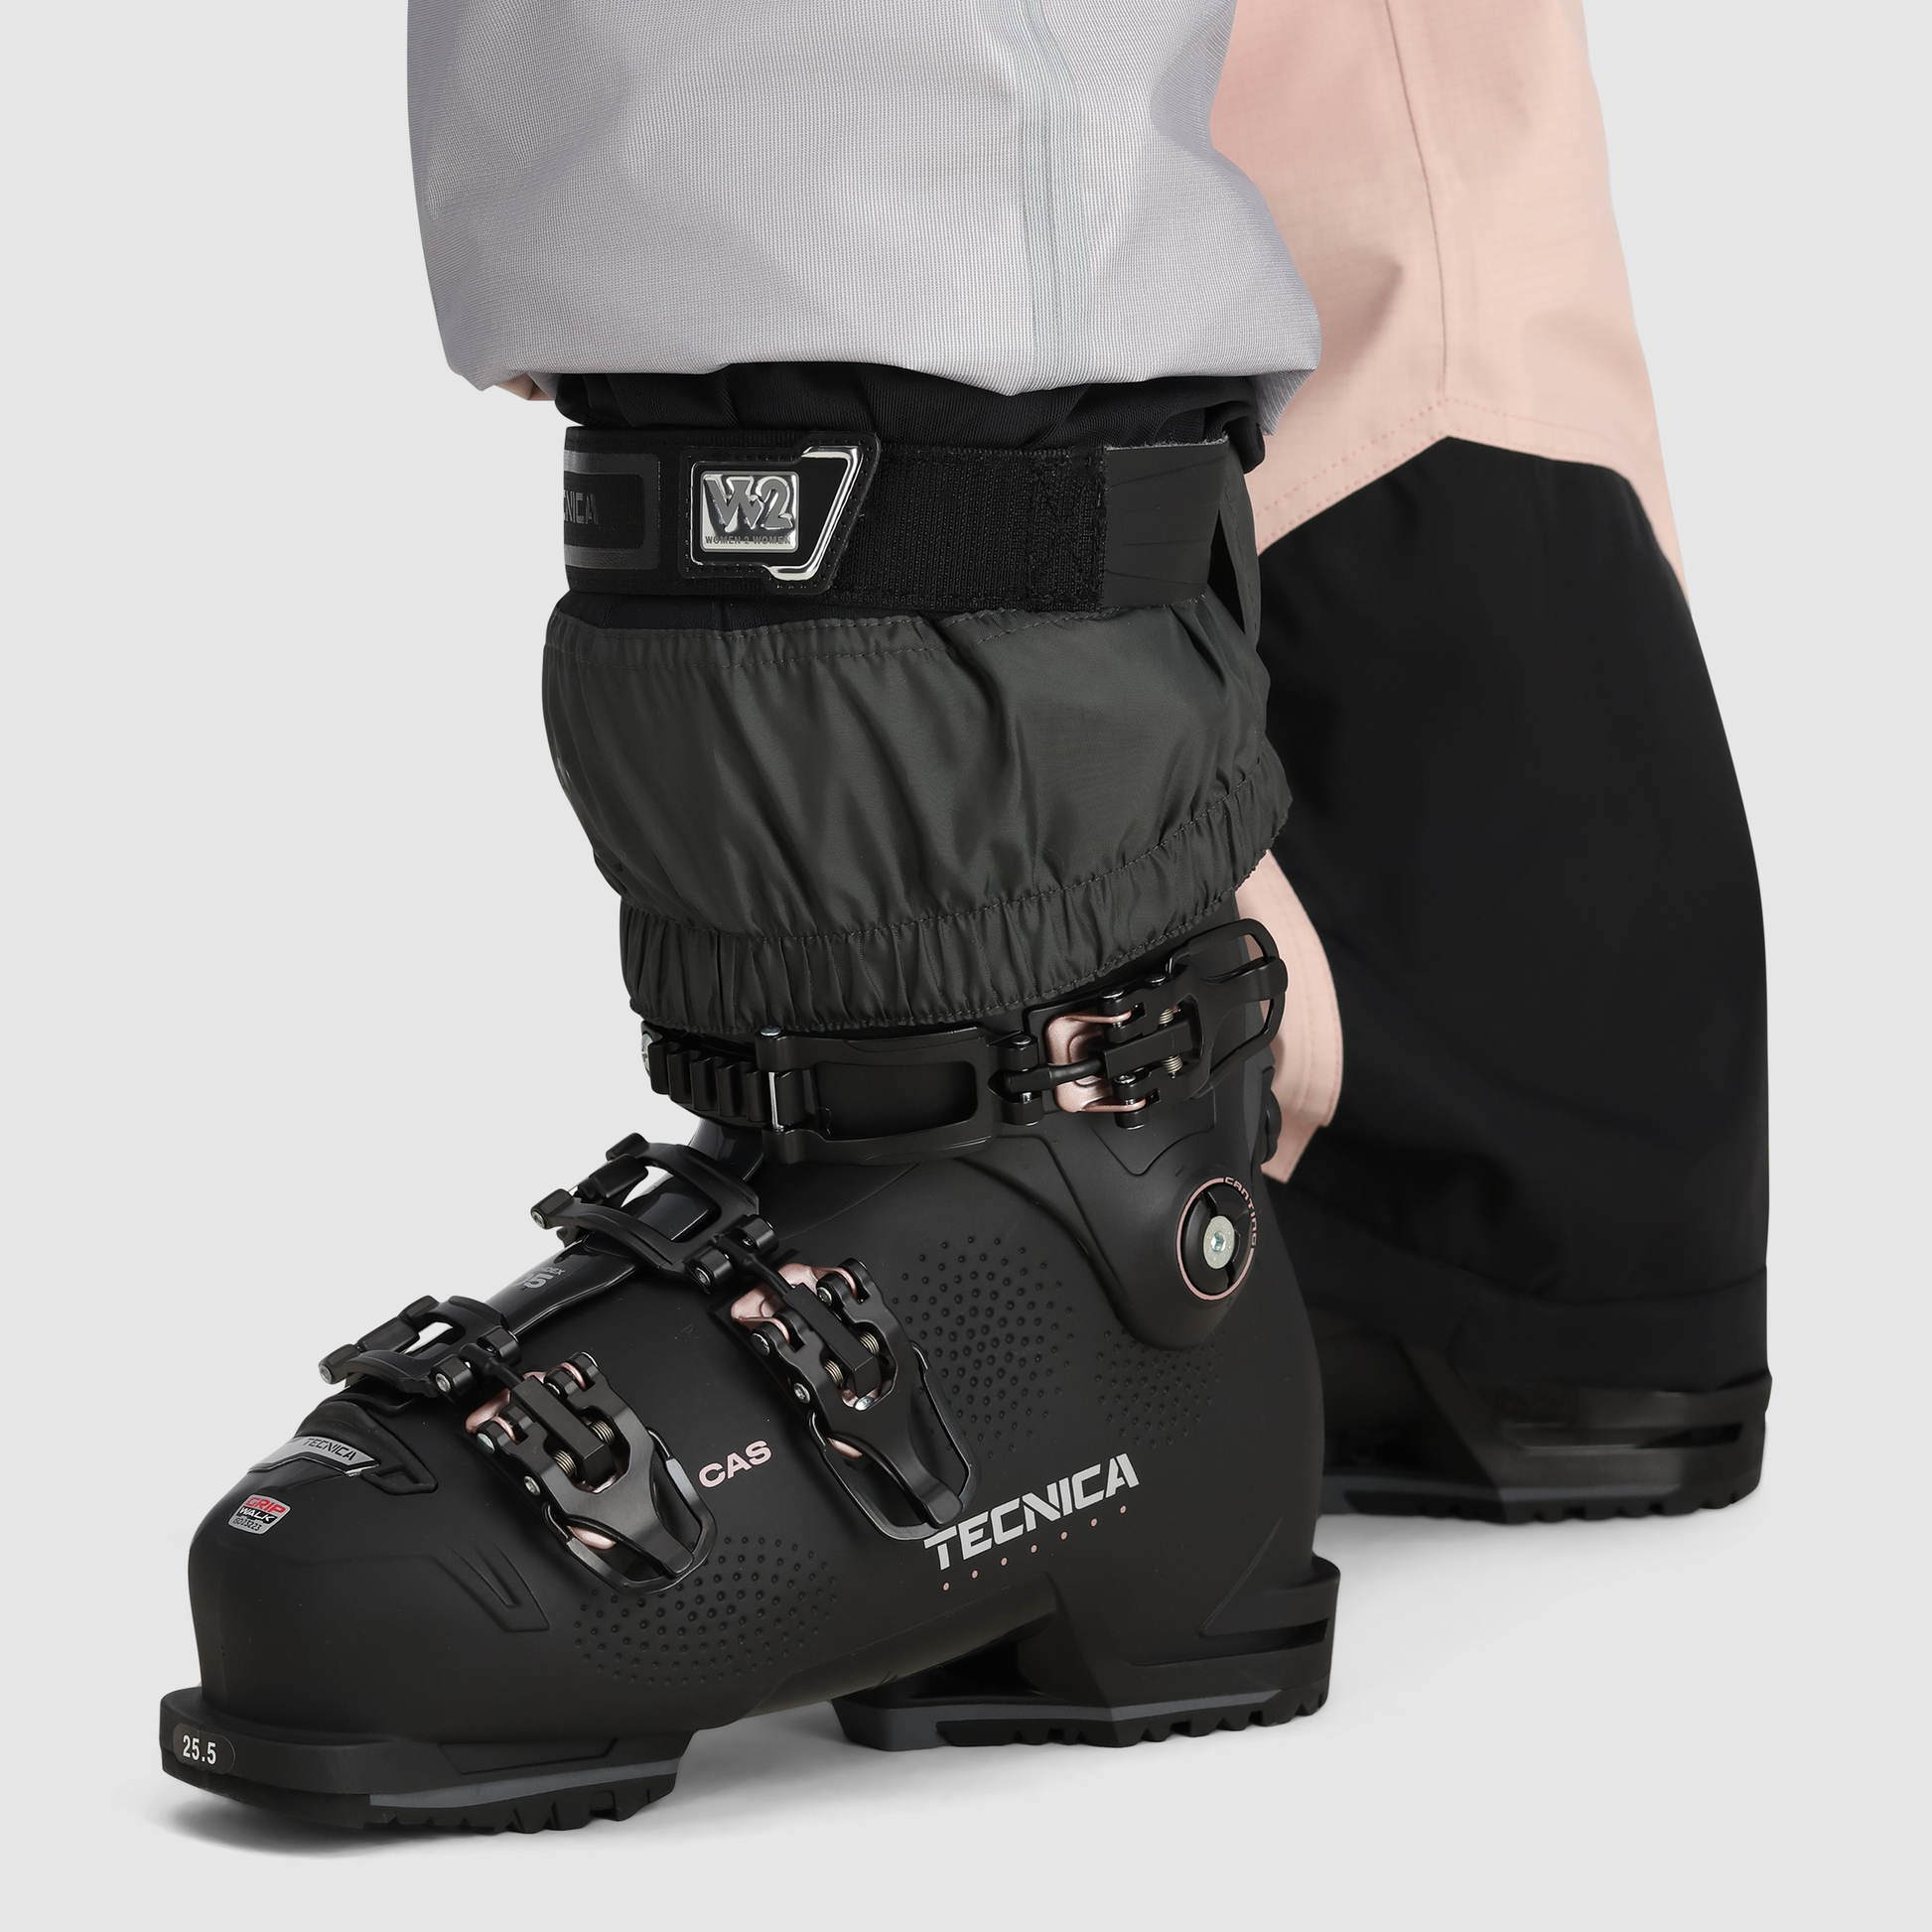 B5 :: Powerstrap Slot / Secure the power strap of your ski boots through this specially-designed slot in the gaiter, tightening your boot without having to adjust the gaiter.